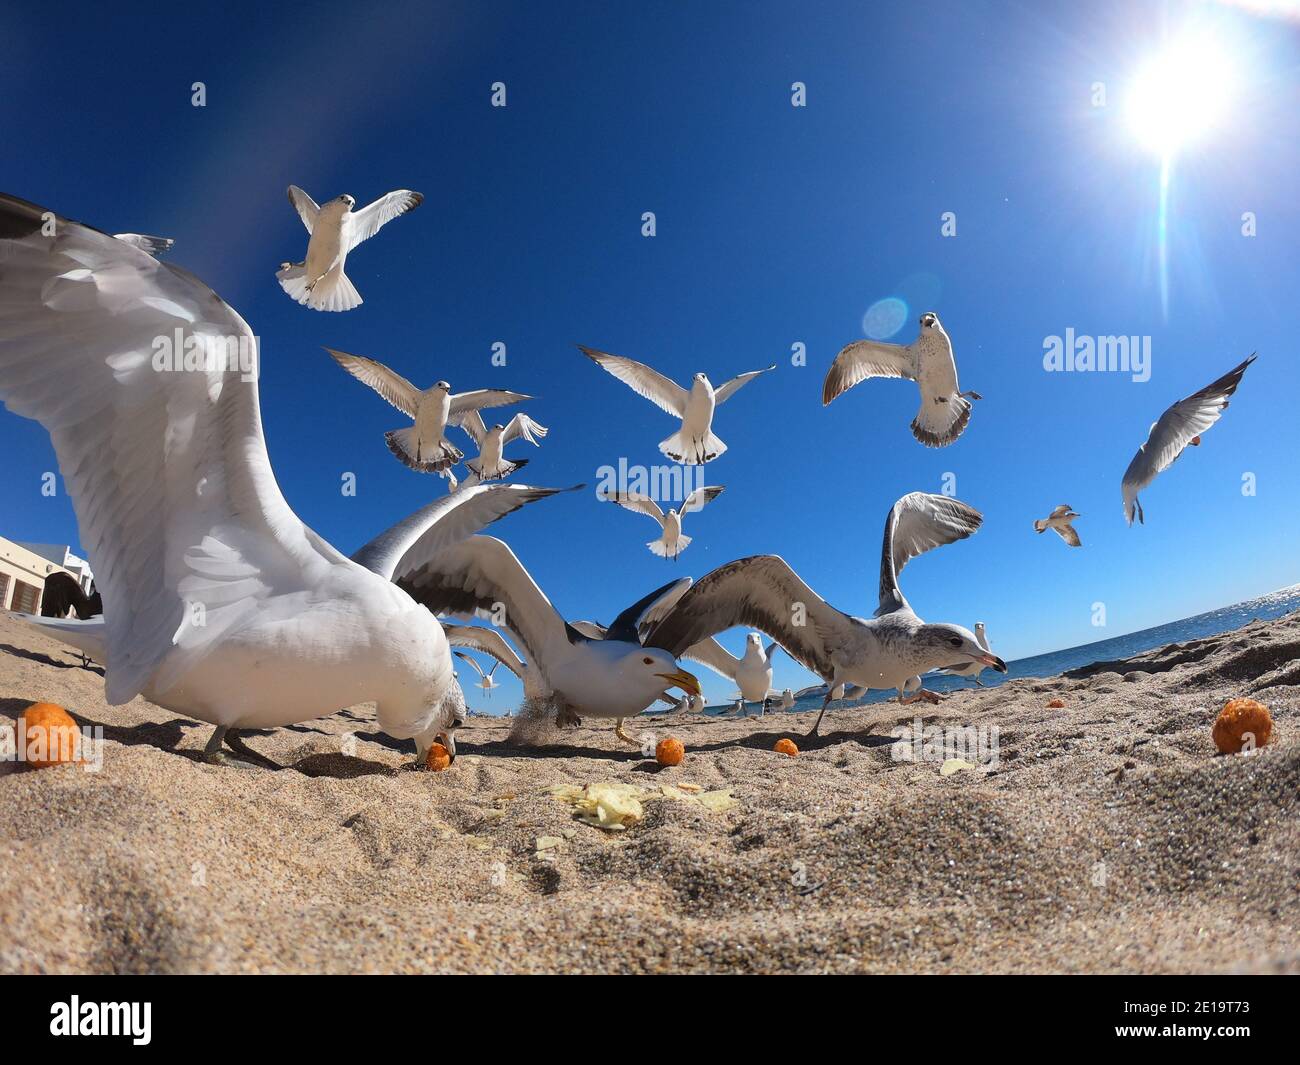 Seagulls flying and feeding on the sand on the shore of Bahia de Kino beach, a tourist destination in the Gulf of California or Sea of Cortez in the state of Sonora, Mexico. Gulls Birds, Seagulls, Sea Gulls, Red Sea, northwest, nature photography, birds, birds.   (Photo by Luis Gutierrez / Norte Photo)  Gaviotas volando y alimentadose sobre la arena a la orilla de la playa  Bahia de Kino, destino turistico del Golfo de California o Mar de Cortez en el estado de Sonora, Mexico. Gulls Birds, Seagulls , Sea Gulls, mar Bermejo, northwest, fotografia de naturaleza, aves, pajaros.  (Photo by Luis Gu Stock Photo